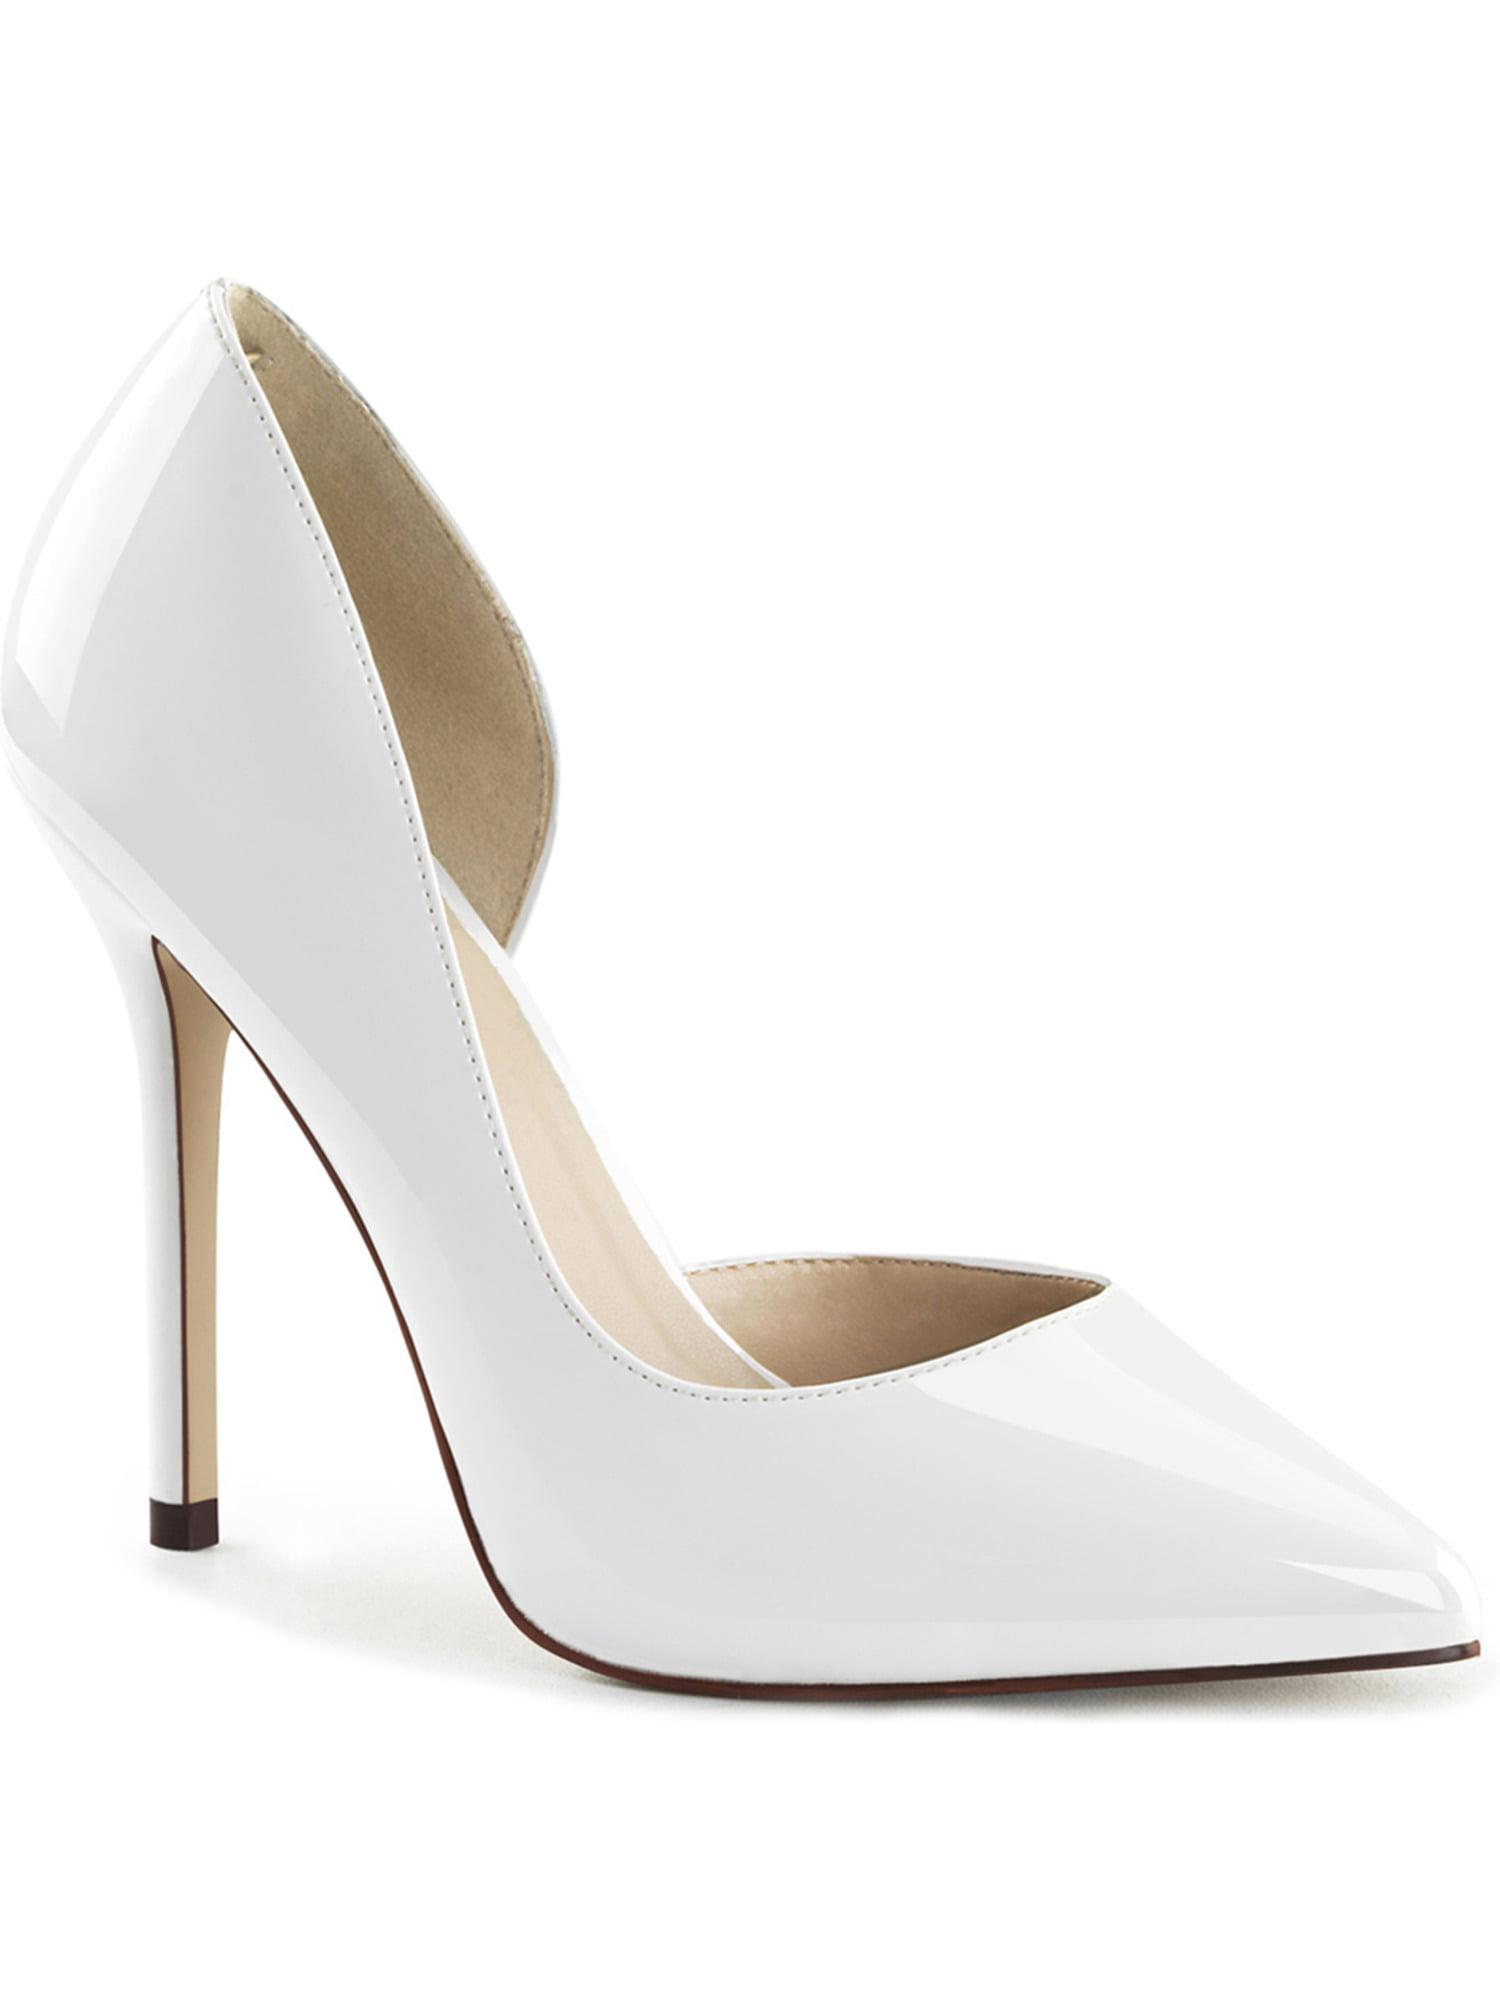 Pleaser - Womens White High Heels D'Orsay Pumps 5 Inch Heels Pointed ...